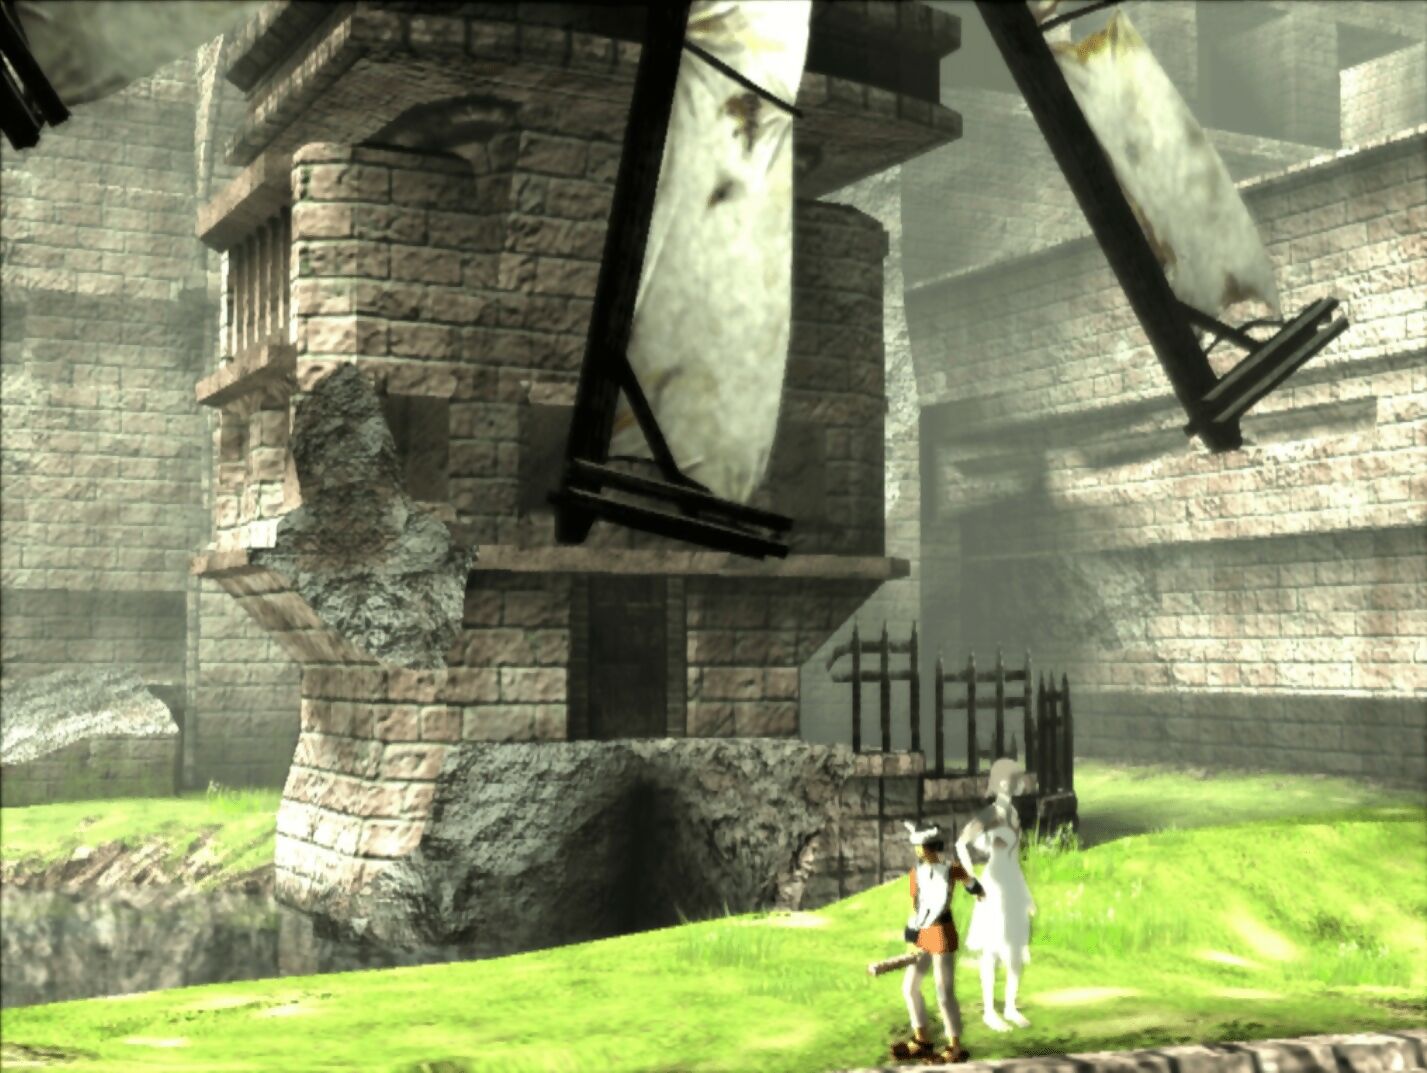 Have people figured out how this game is connected to ICO/SotC yet